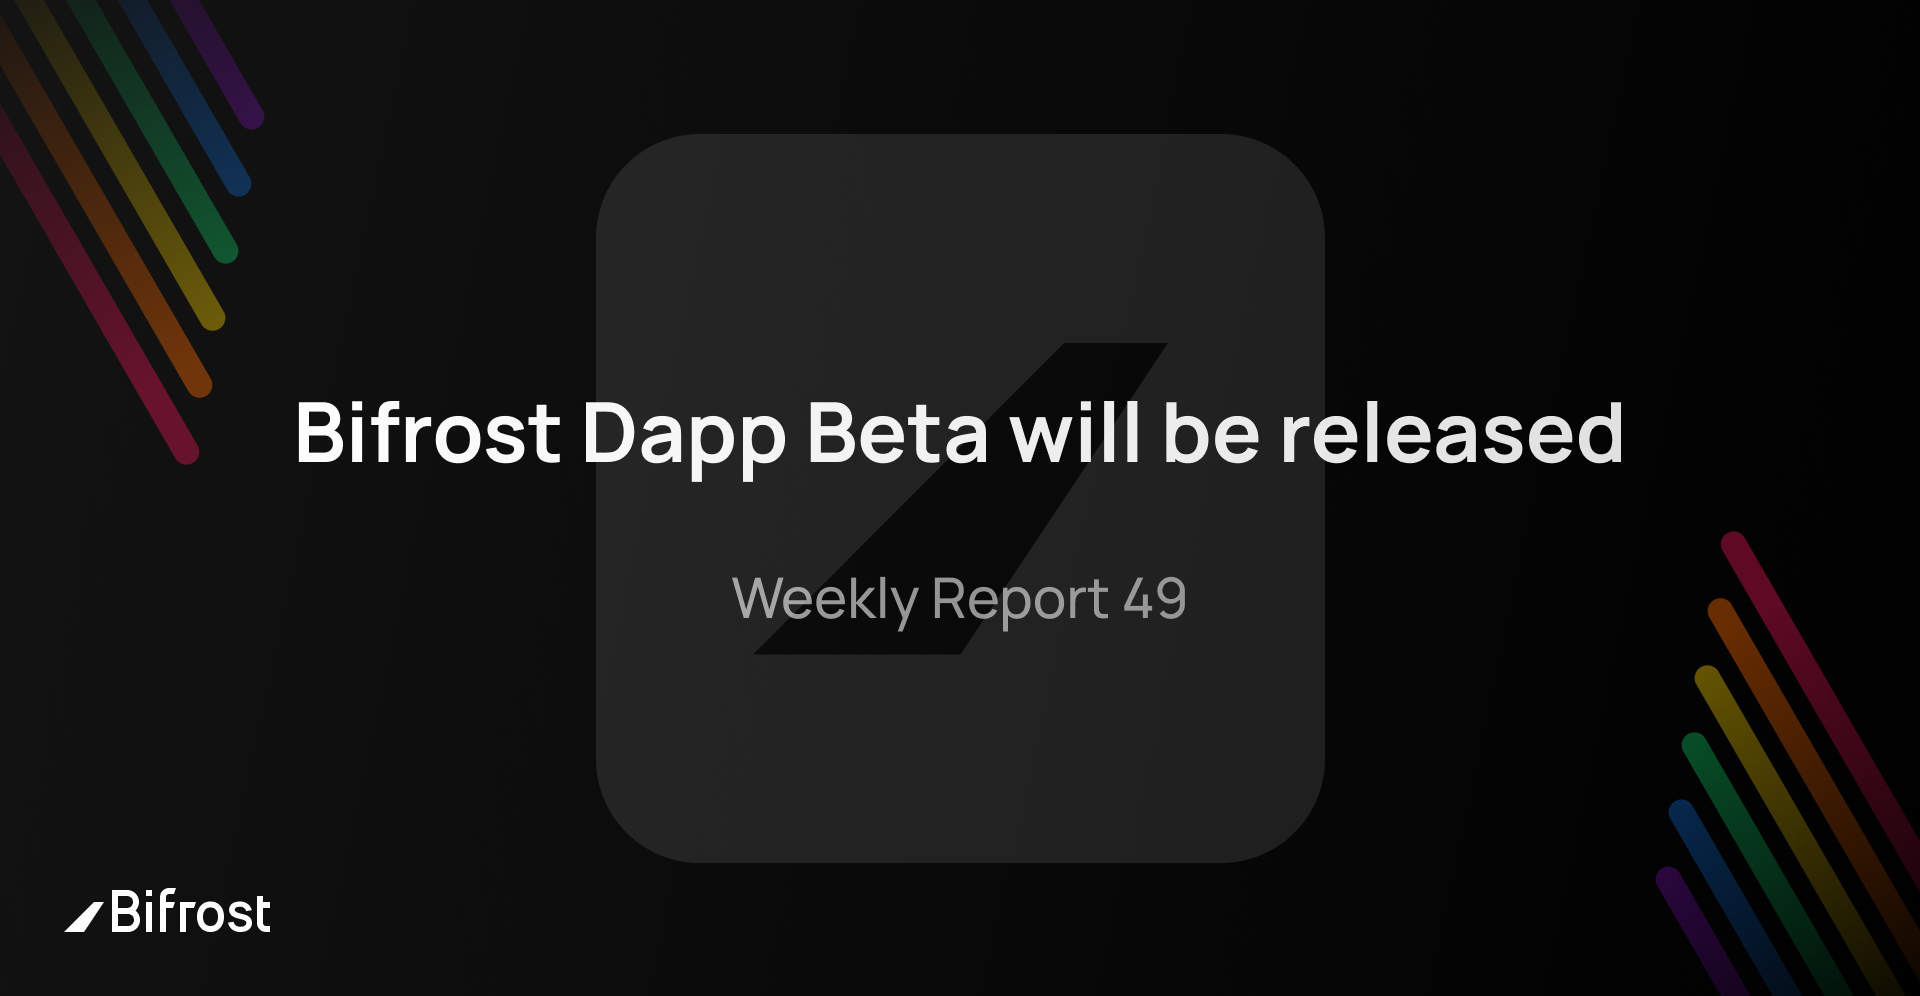 Bifrost Dapp Beta will be released on April 13, Weekly Report 49